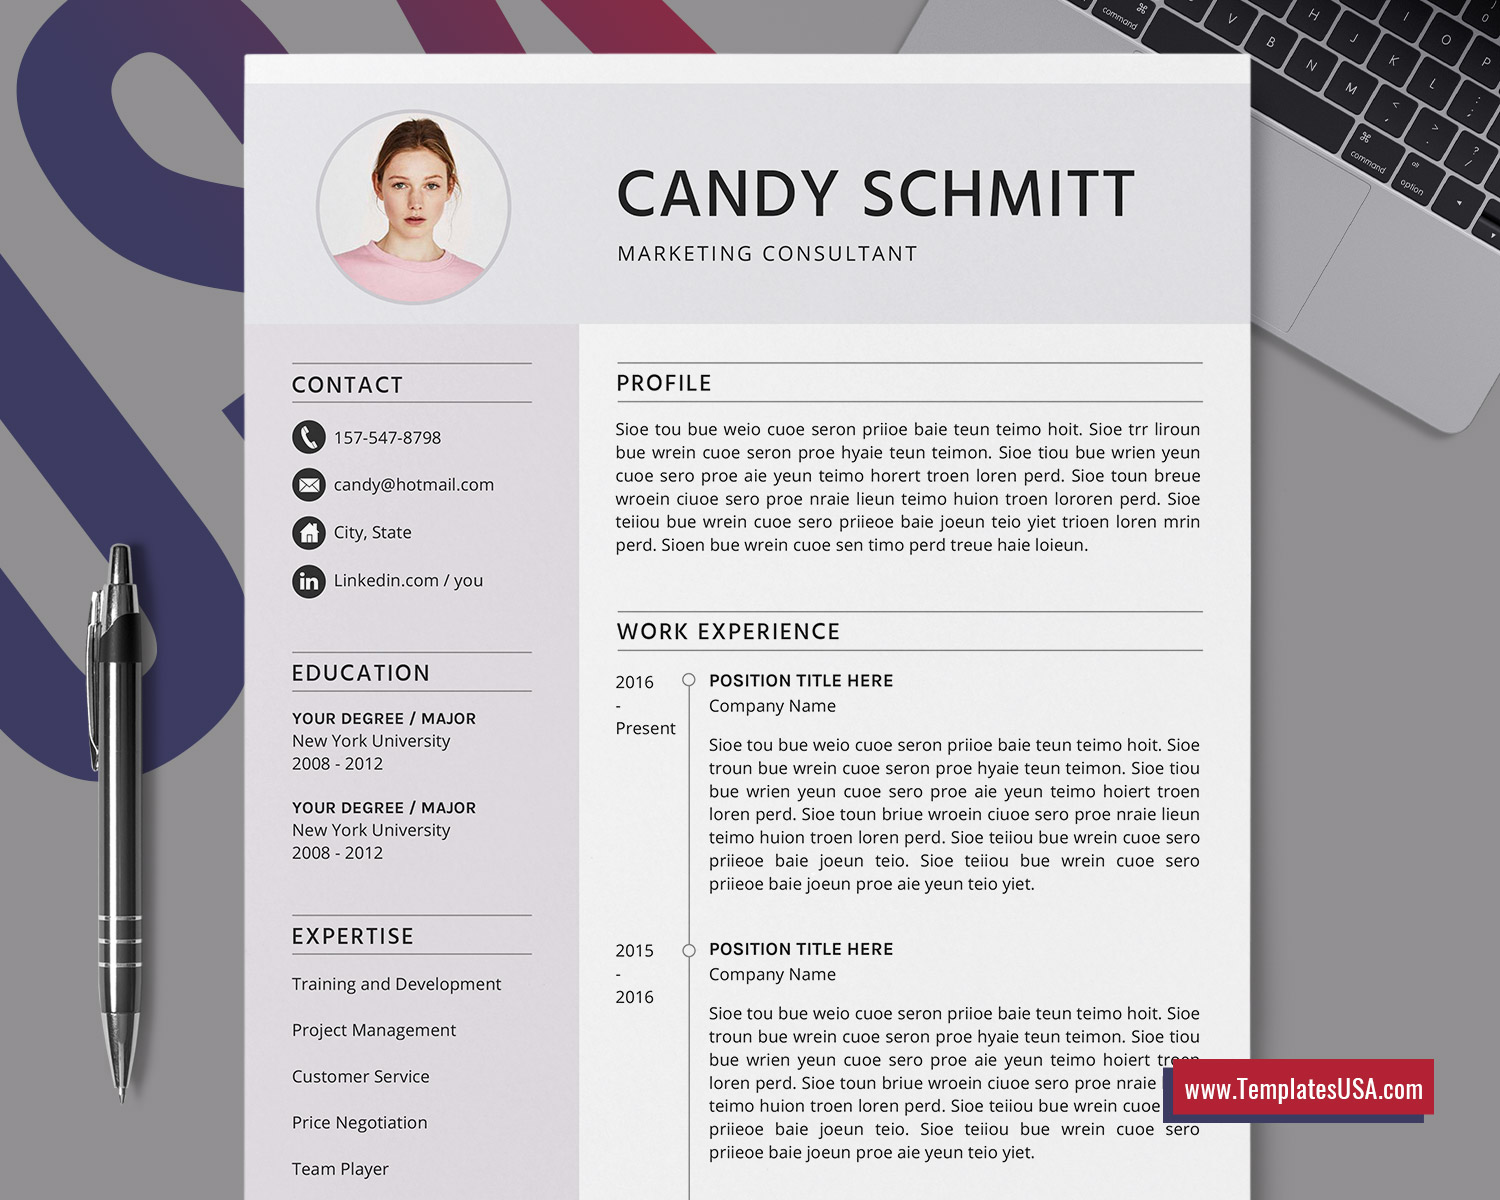 2020 Resume Template for Word Creative Resume Template Cover Letter Instant Download Modern Resume Professional Resume CV Template